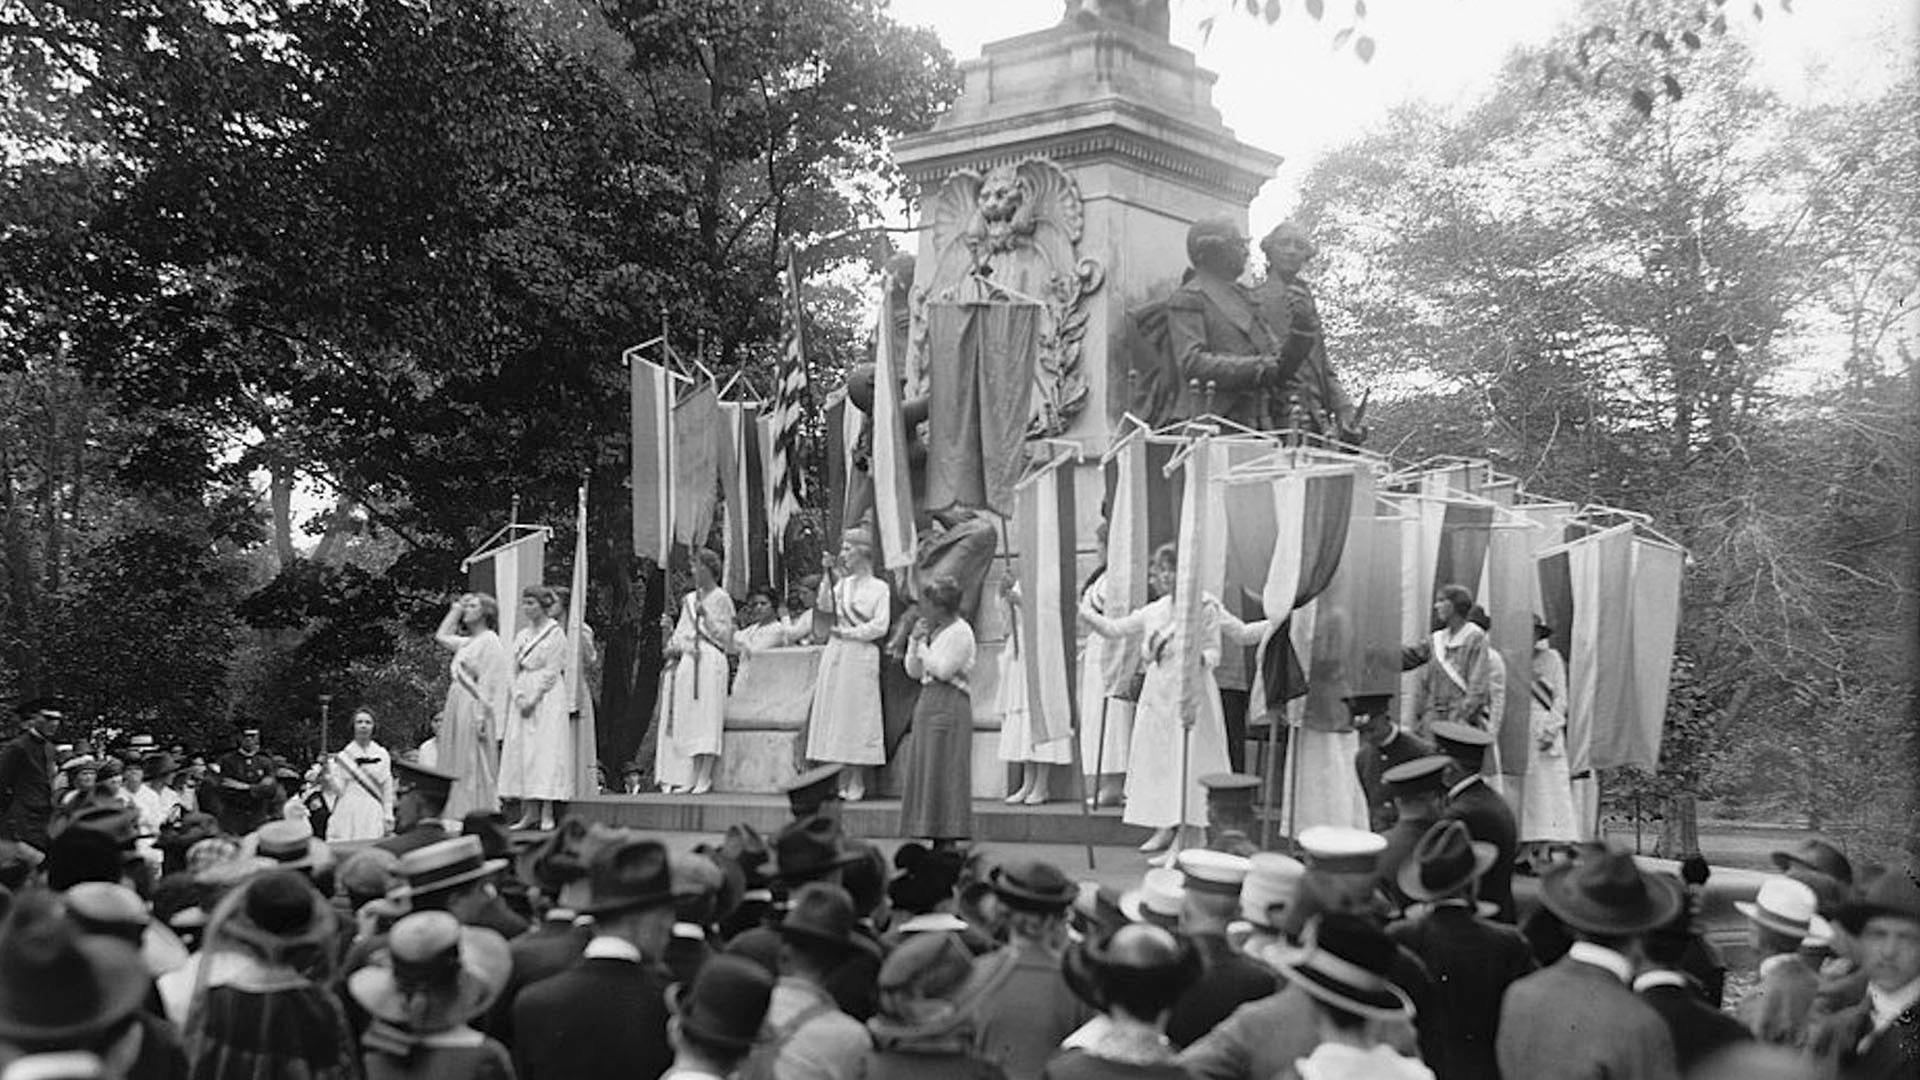 Black and white image of suffragettes at Lafayette